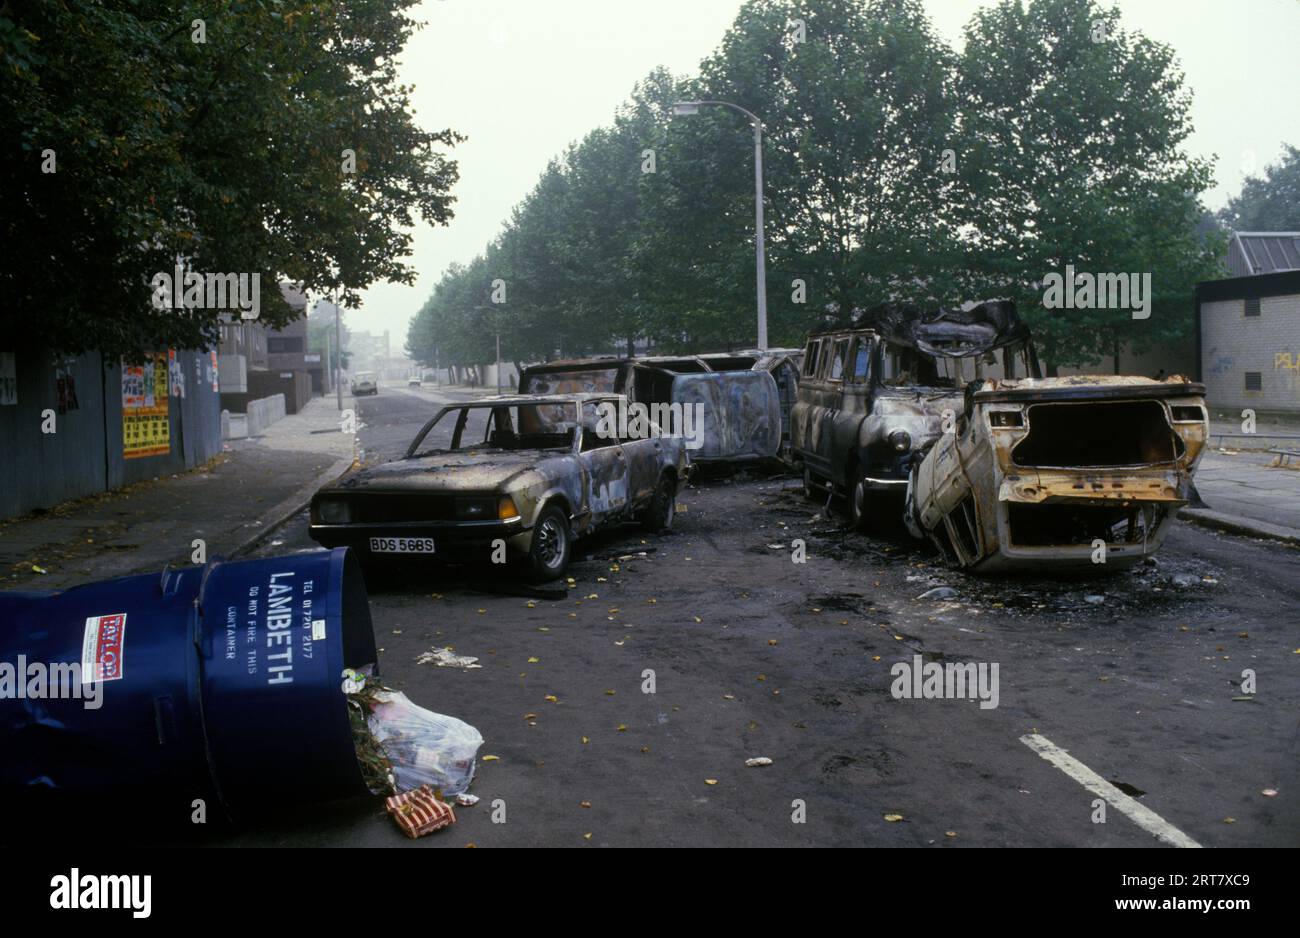 Brixton Riots 1980s UK.  The day after the riot damage burnout cars in the street. Brixton South London Uk April 1981 England HOMER SYKES. Stock Photo